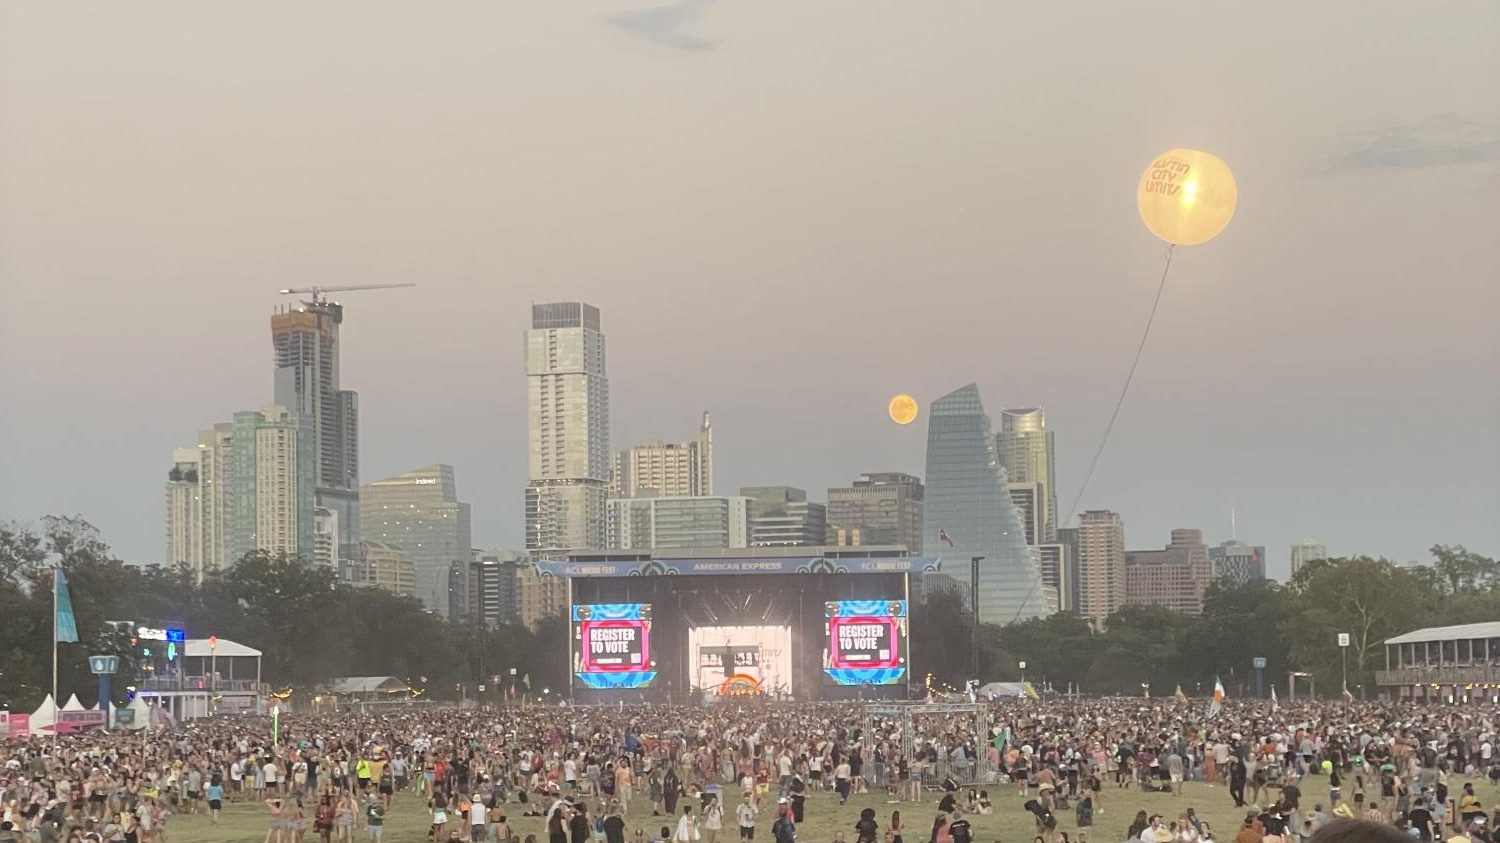 ACL Music Festival stage with energetic crowd - 2012 lineup